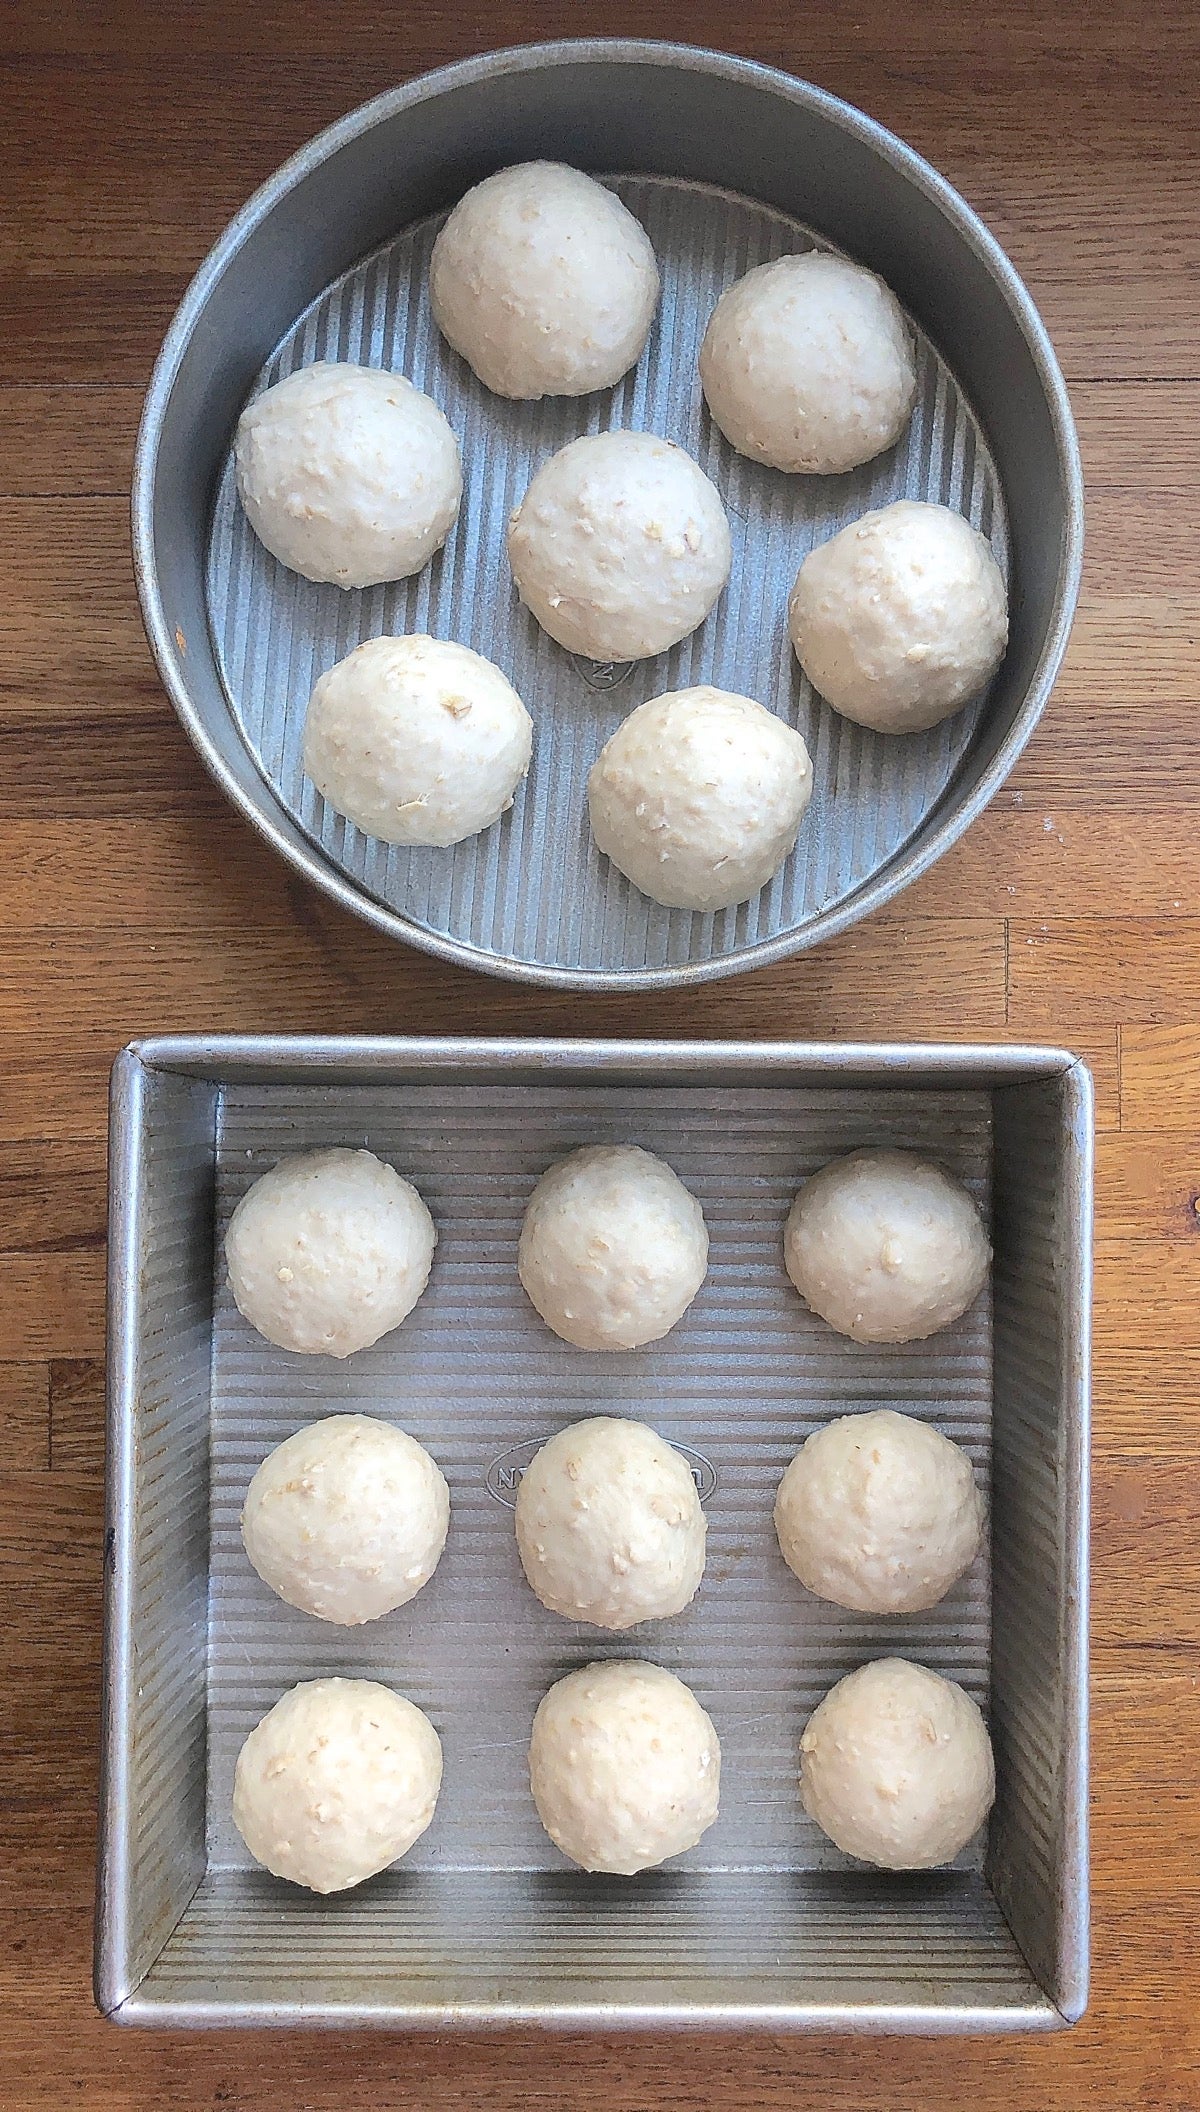 Oatmeal bread dough shaped into rolls and spaced in pans, ready to rise